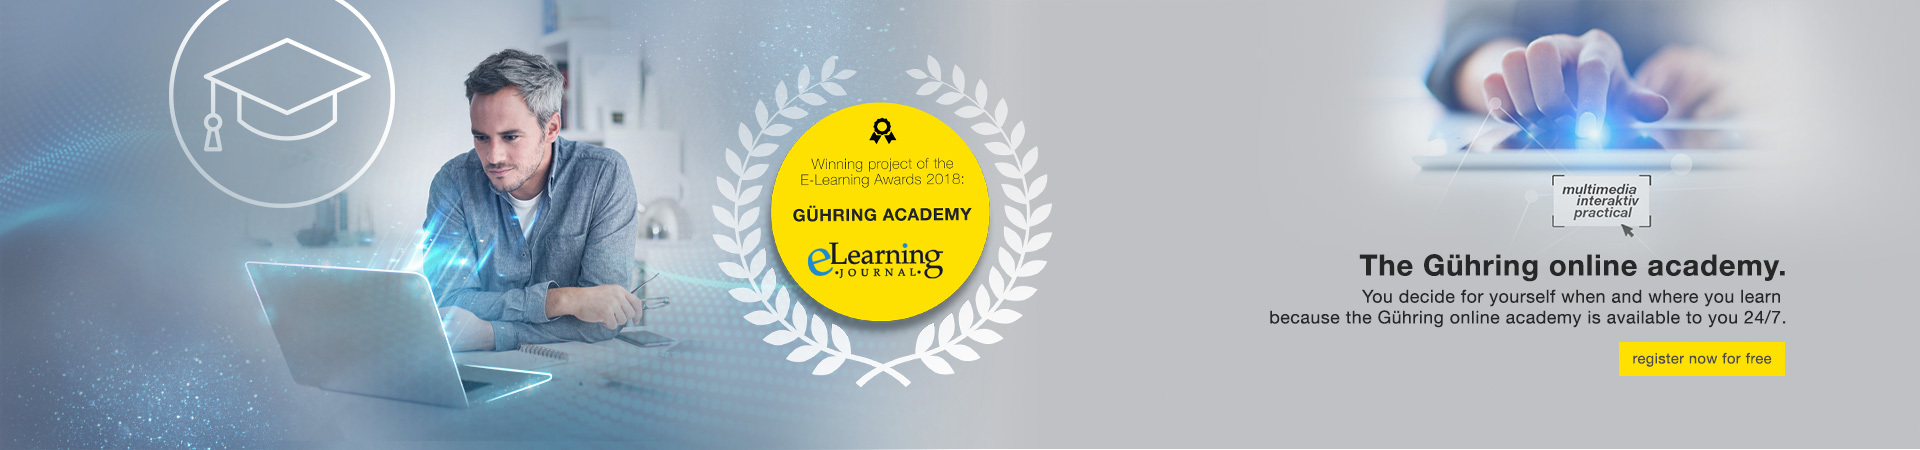 Gühring Academy - about drilling tools